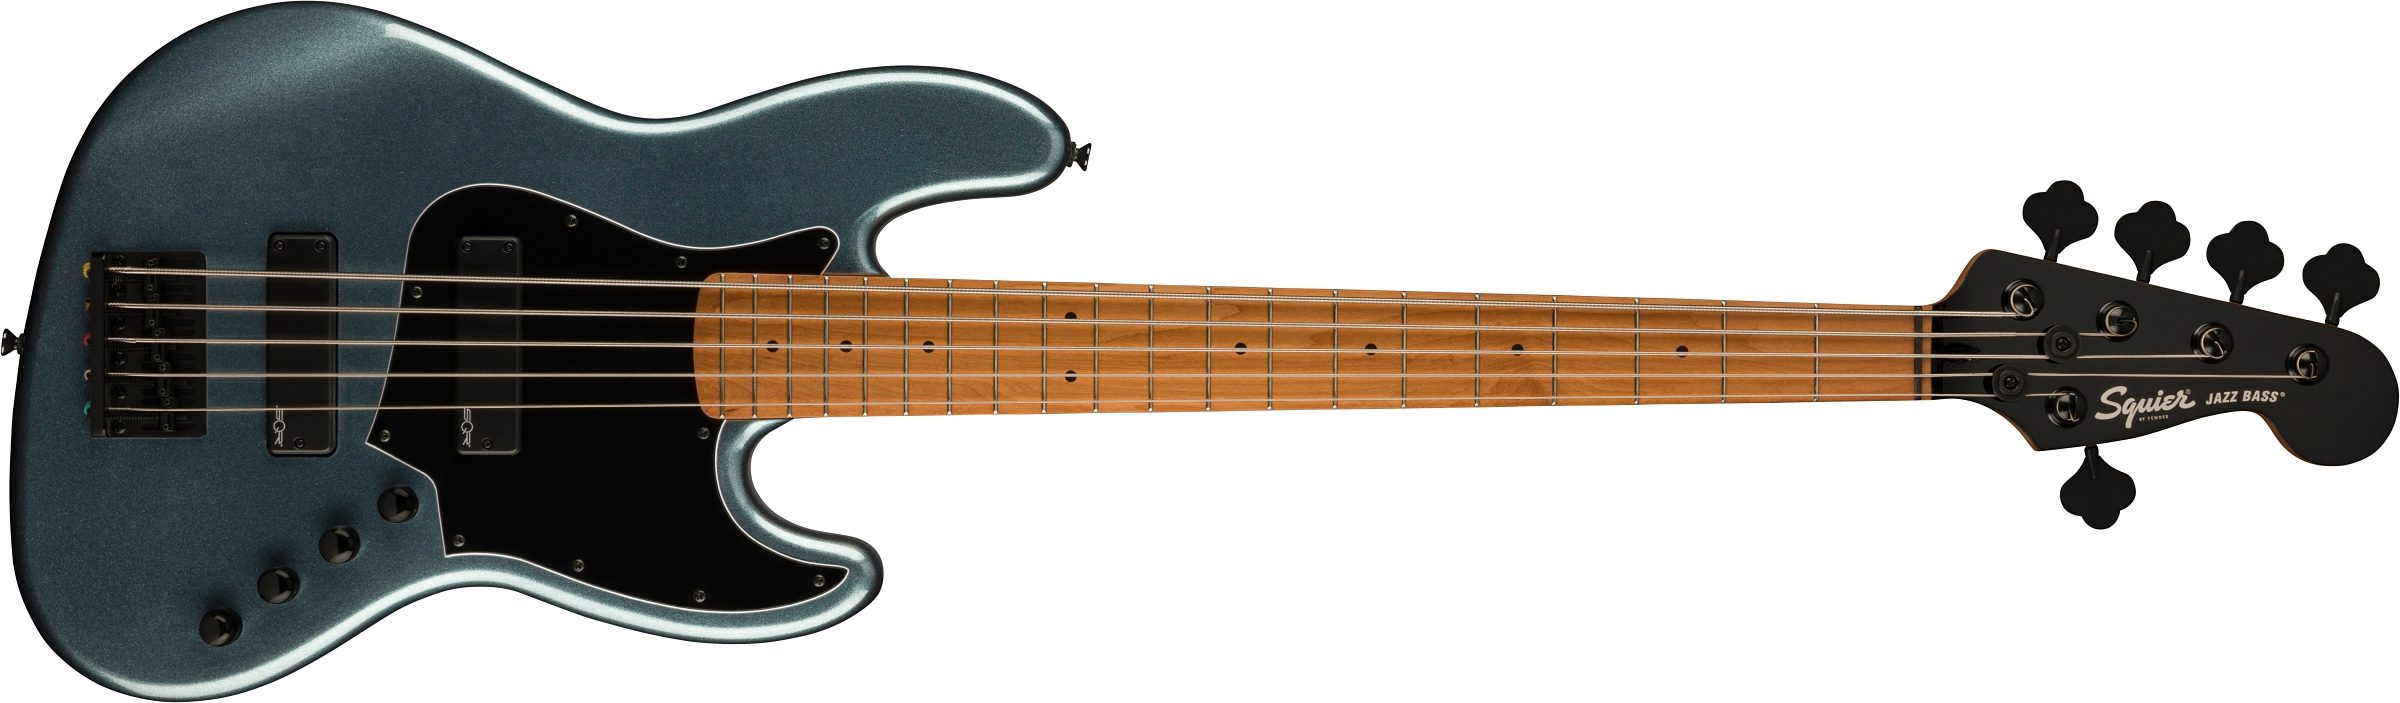 The Squier Contemporary Series has been expanded - gearnews.com